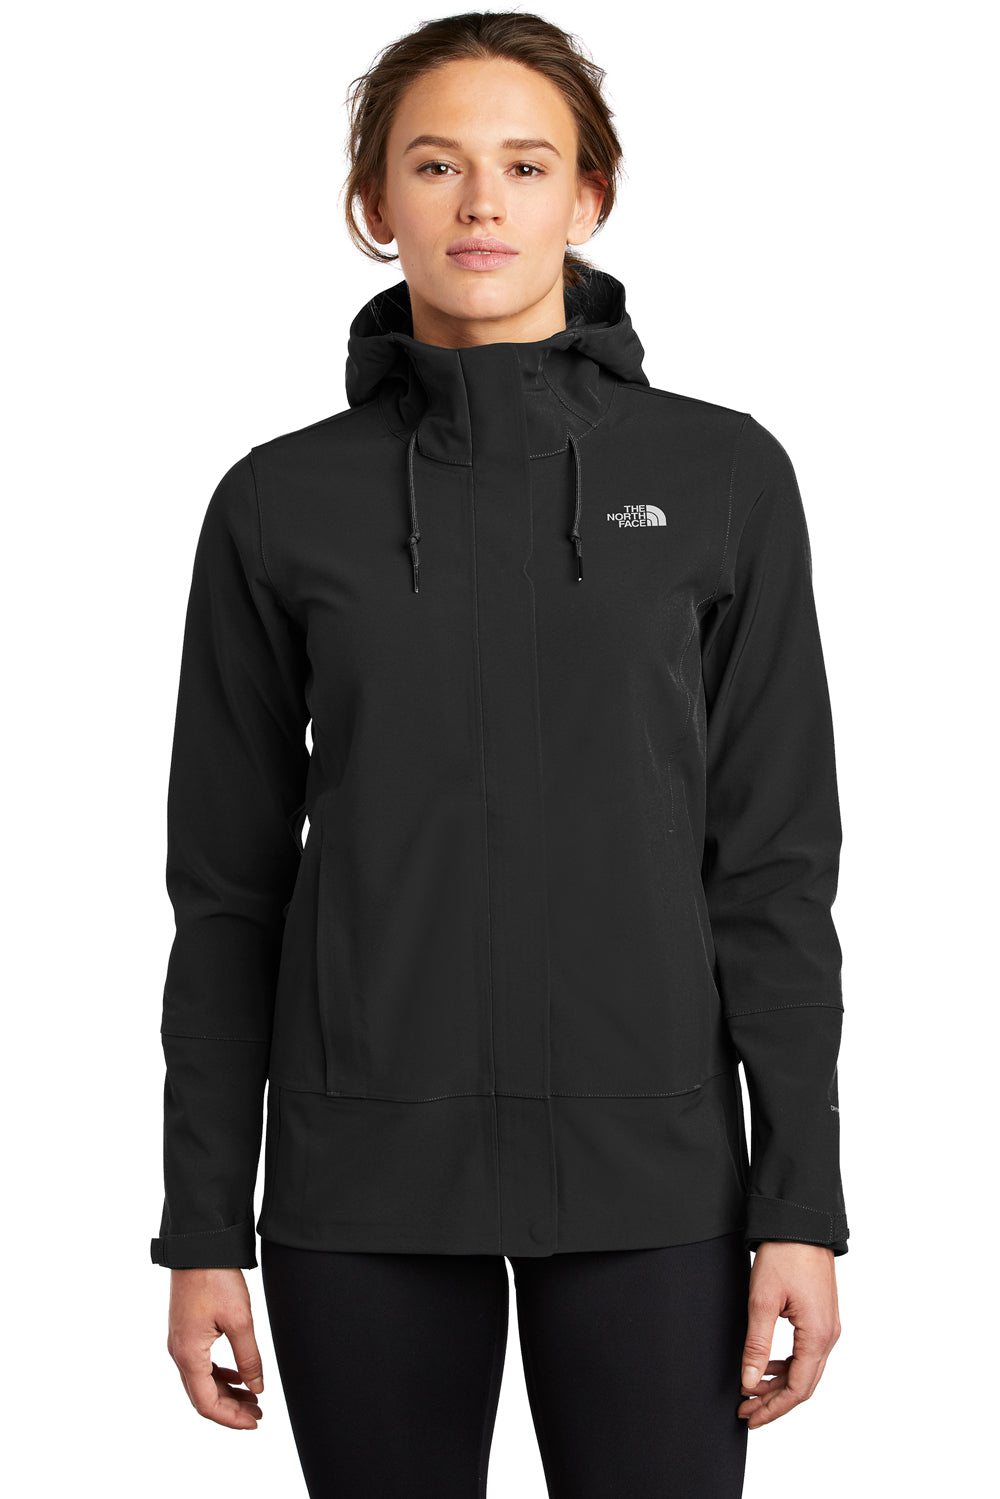 The North Face Womens Apex DryVent Full Zip Hooded Jacket Black Front